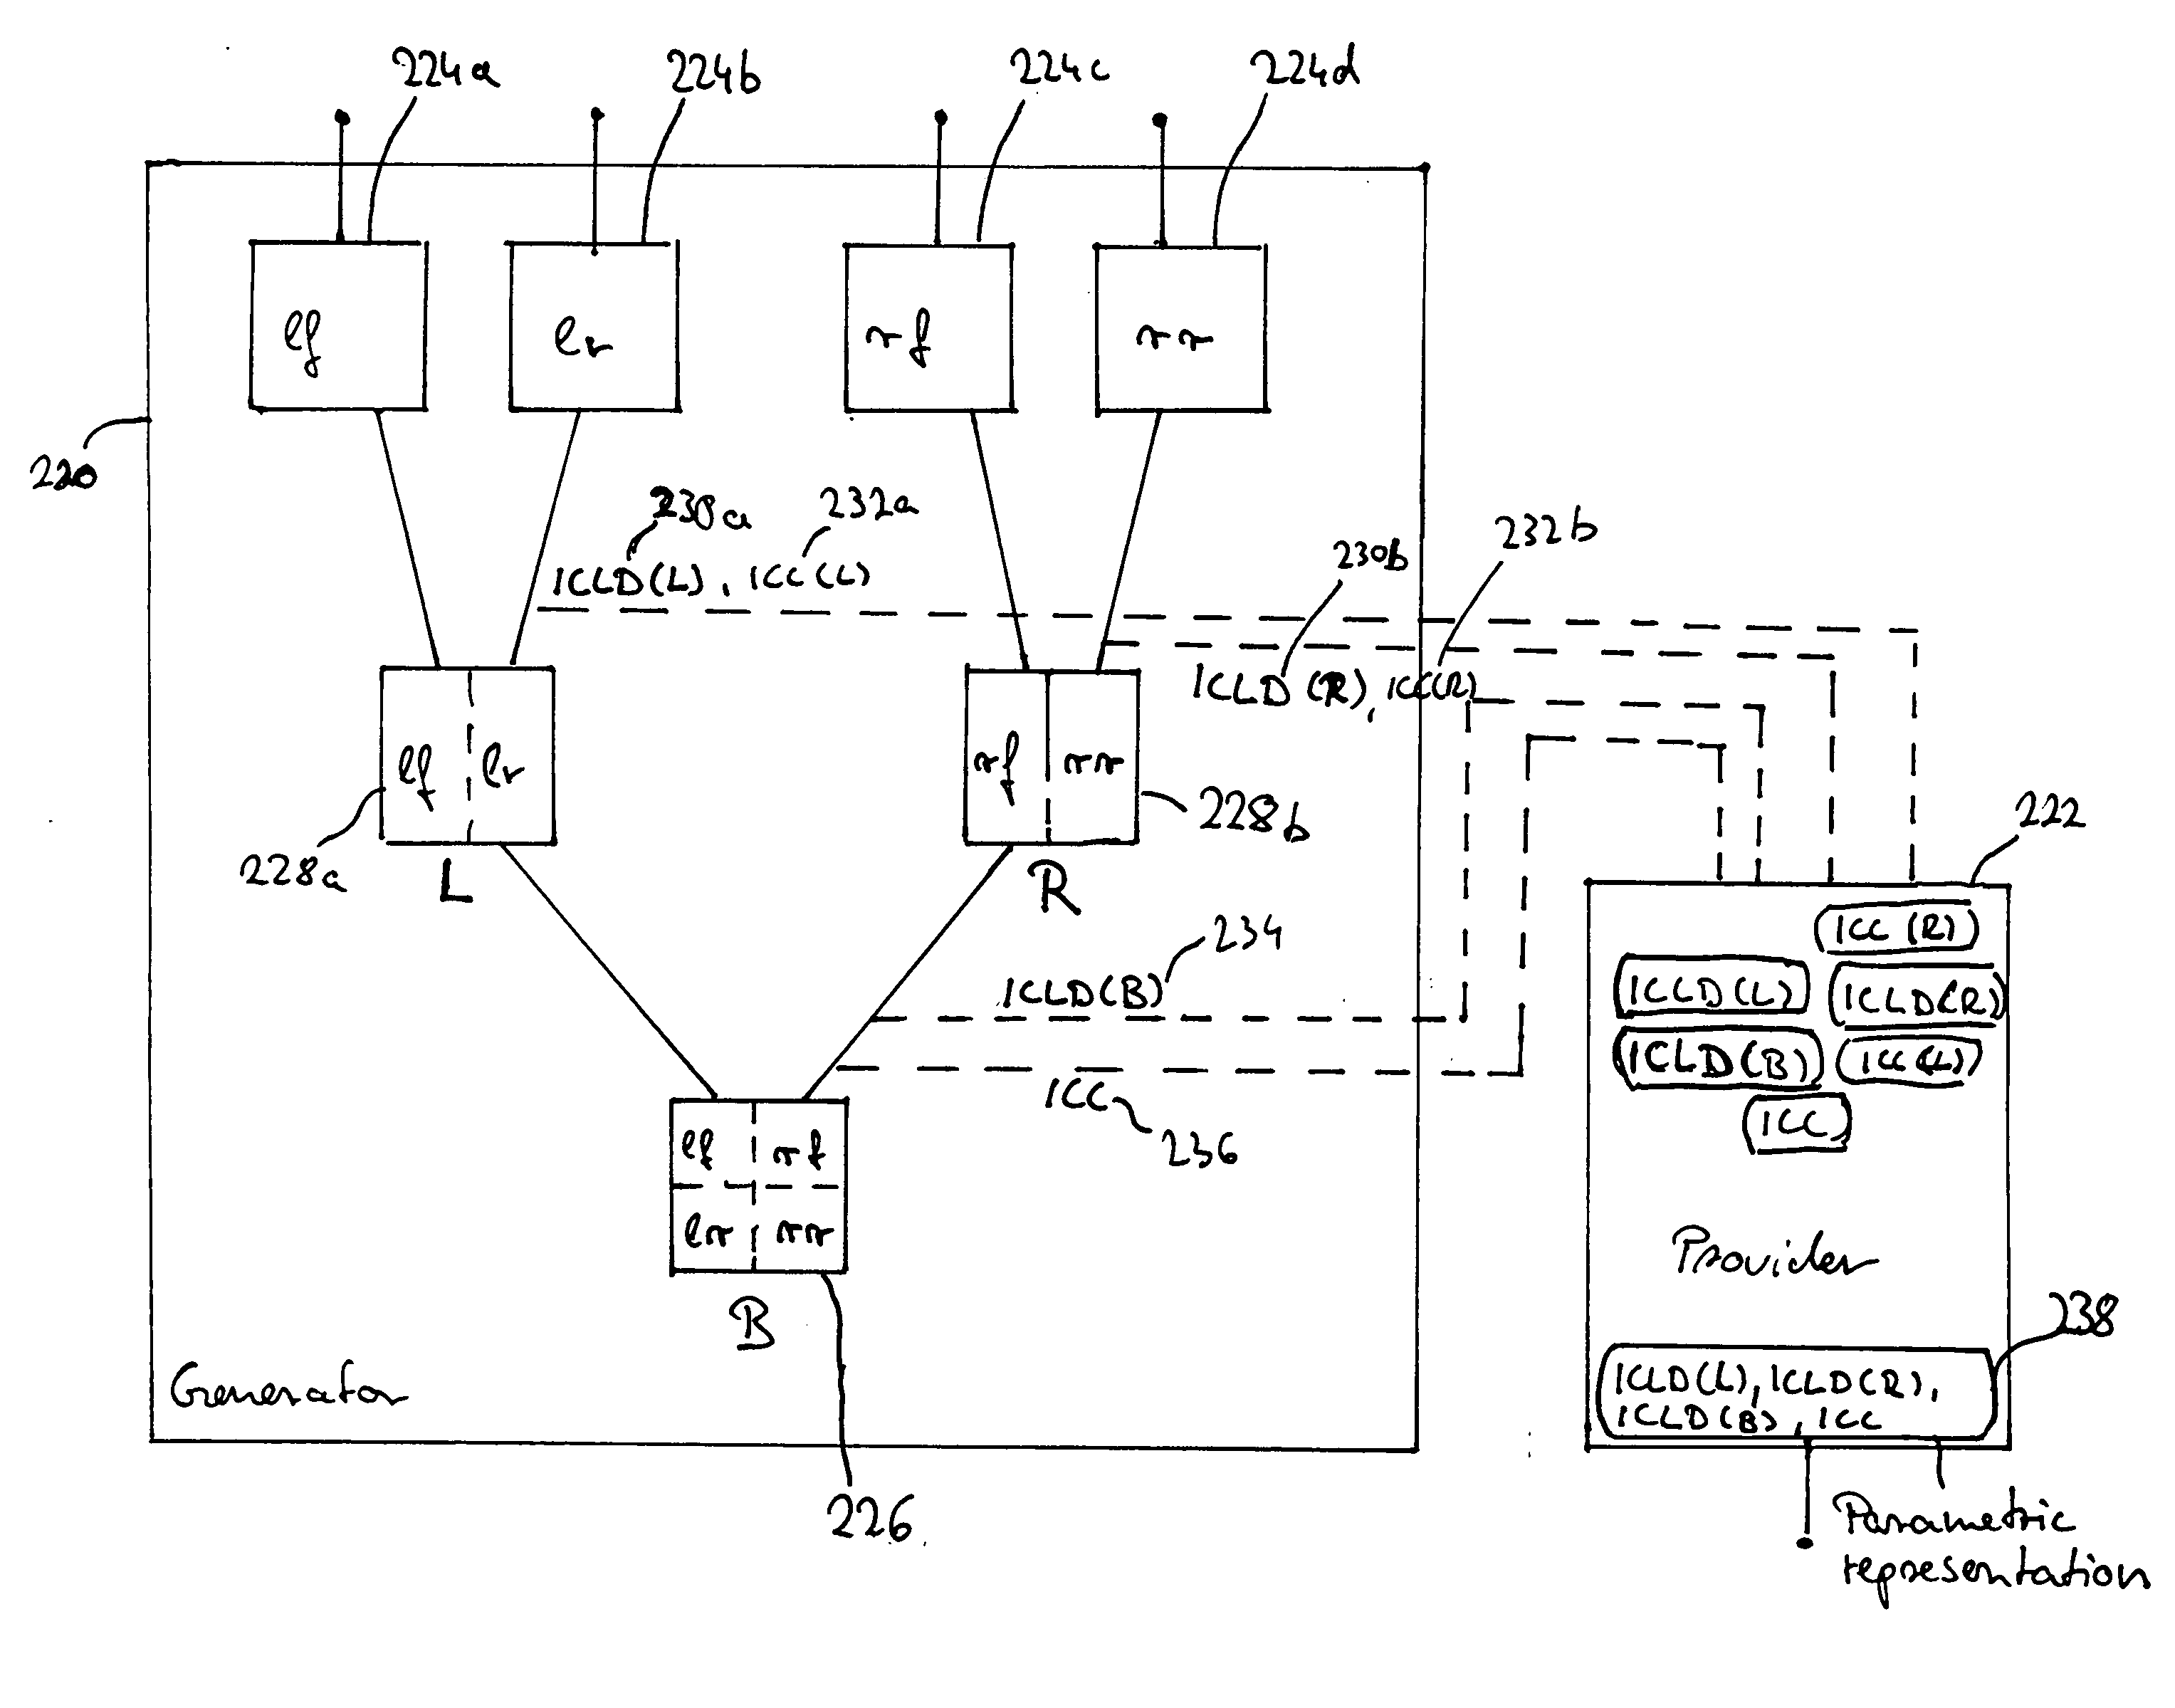 Multi-channel hierarchical audio coding with compact side information